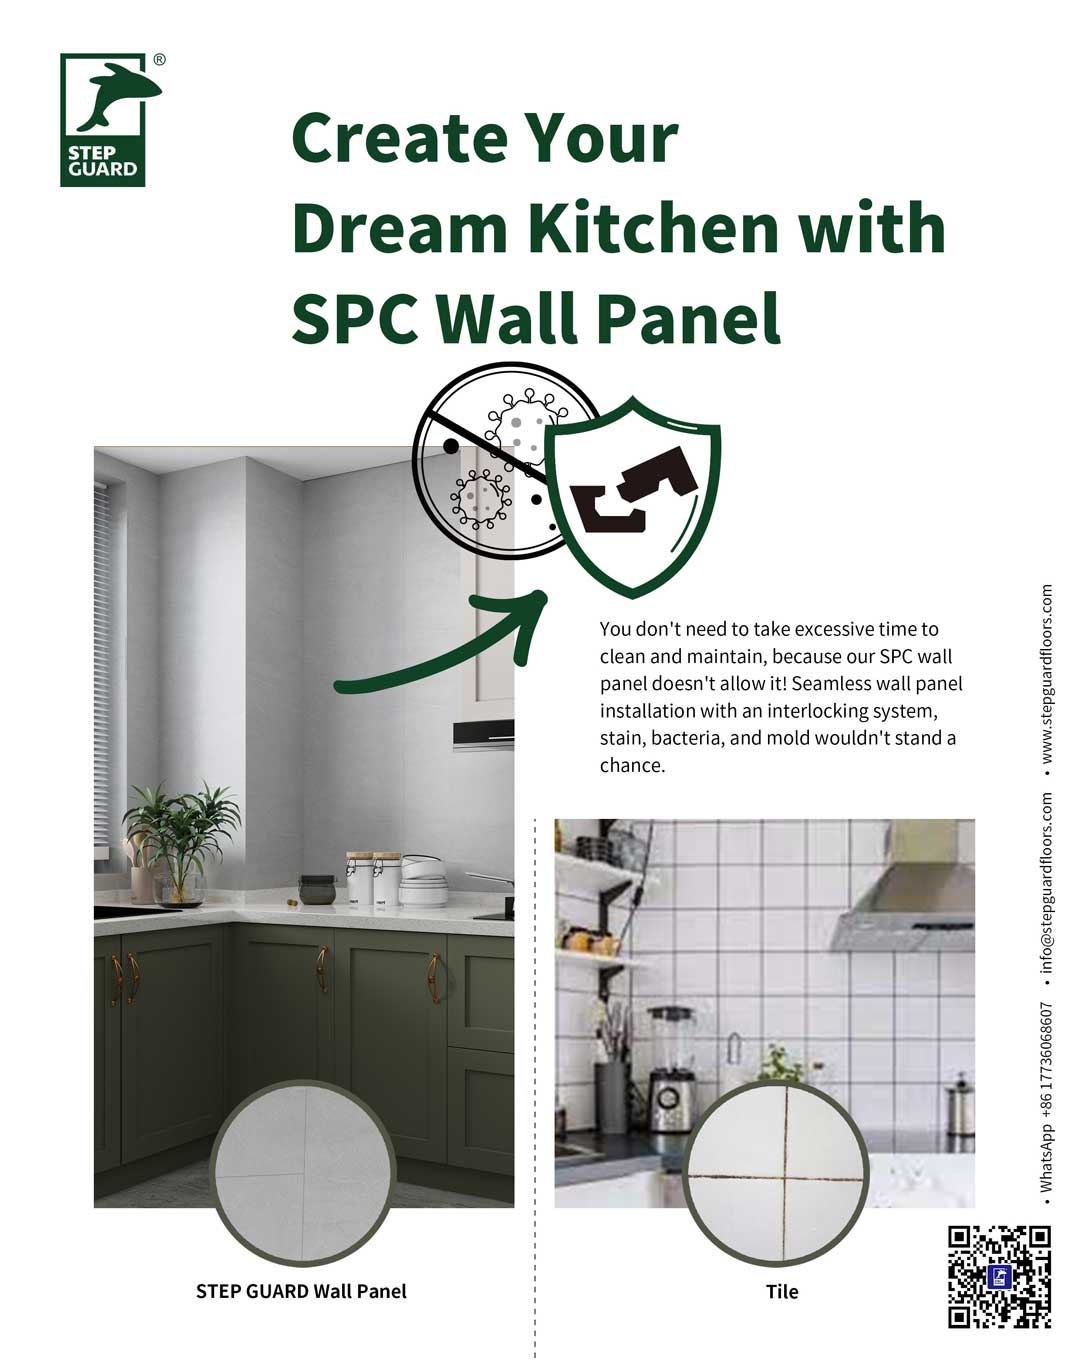 SPC Wall Panel prevents bacteria and mildew, promotes hygienic environment in catering facilities and restaurants